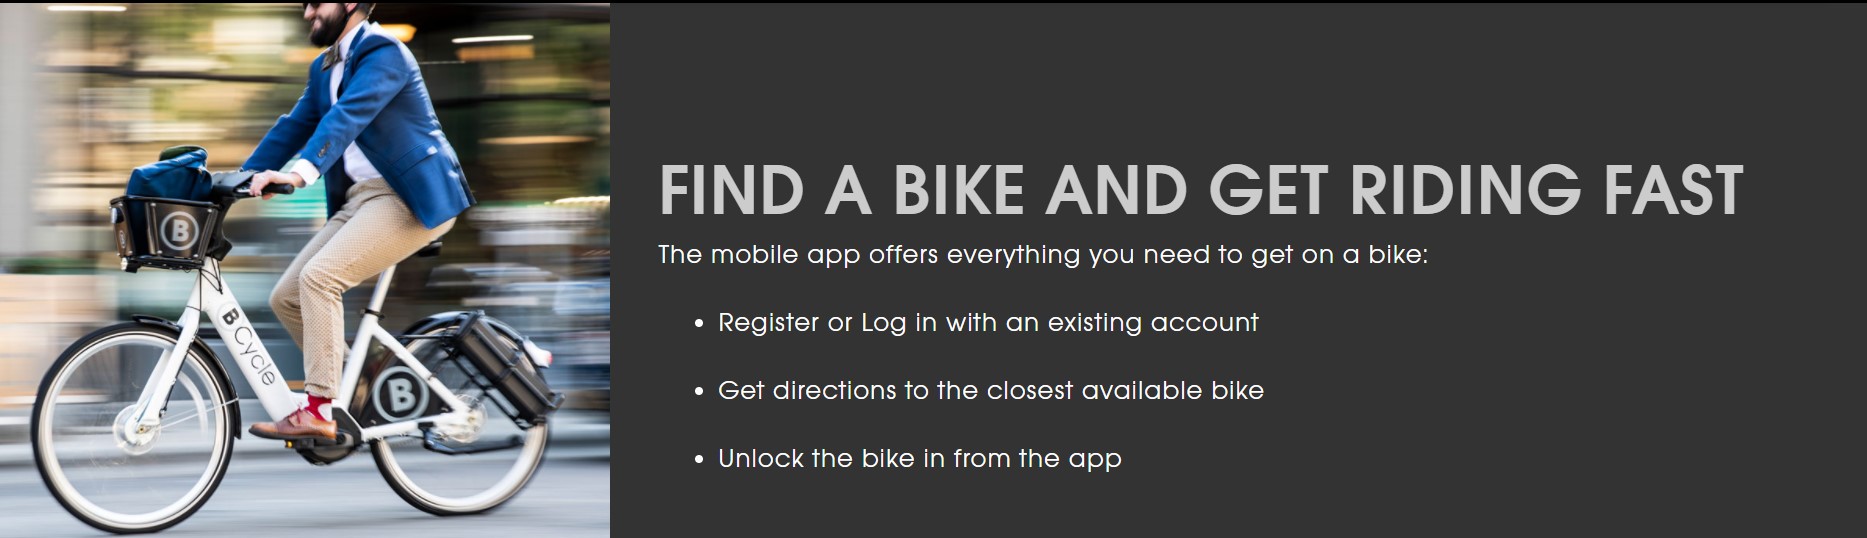 Introducing the new BCycle app—Checkout bikes, manage your account, or get directions